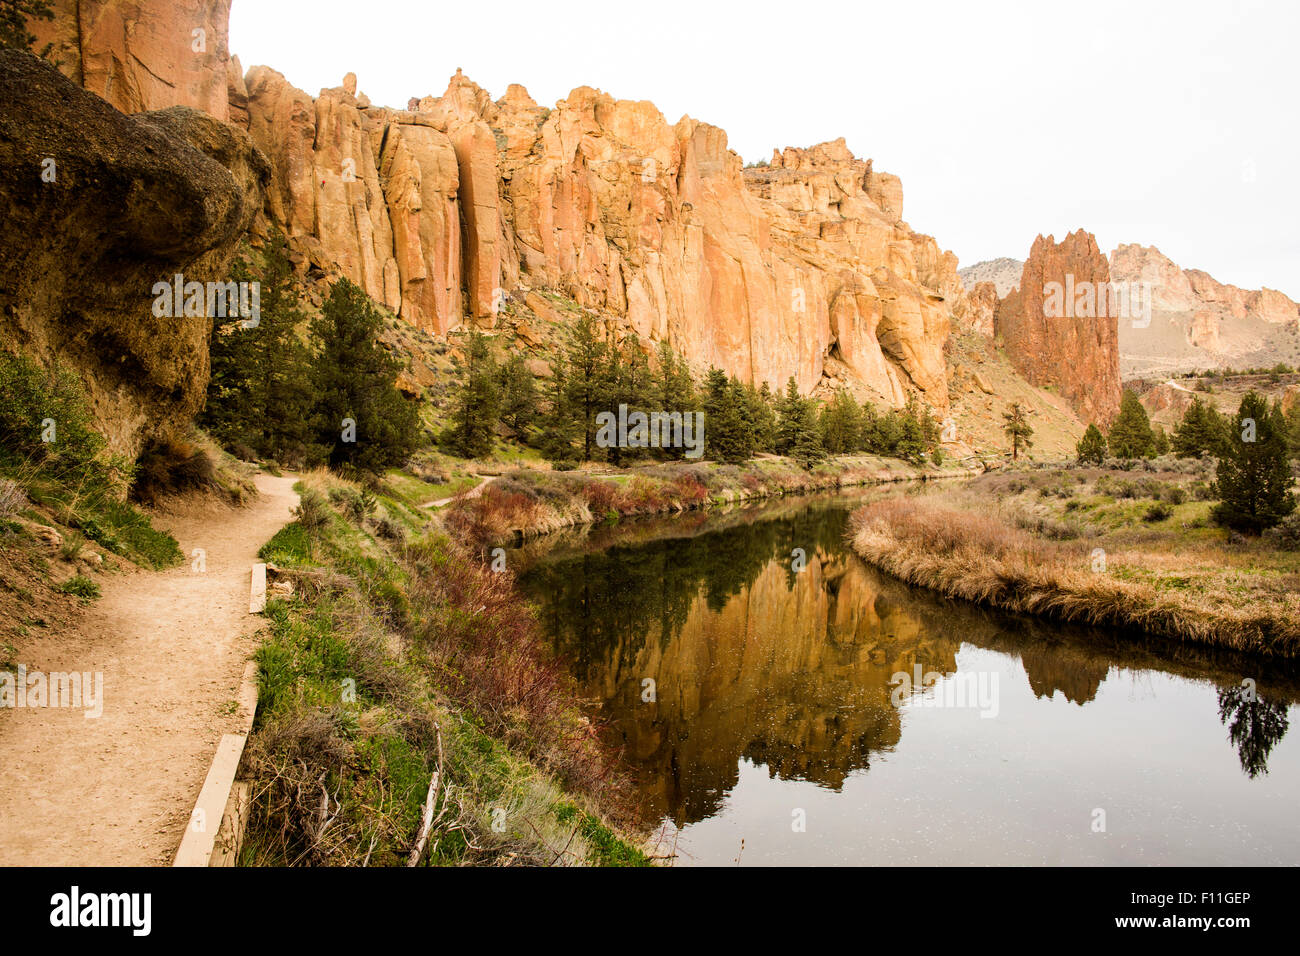 Desert cliffs reflecting in still river, Smith Rock State Park, Oregon, United States Stock Photo